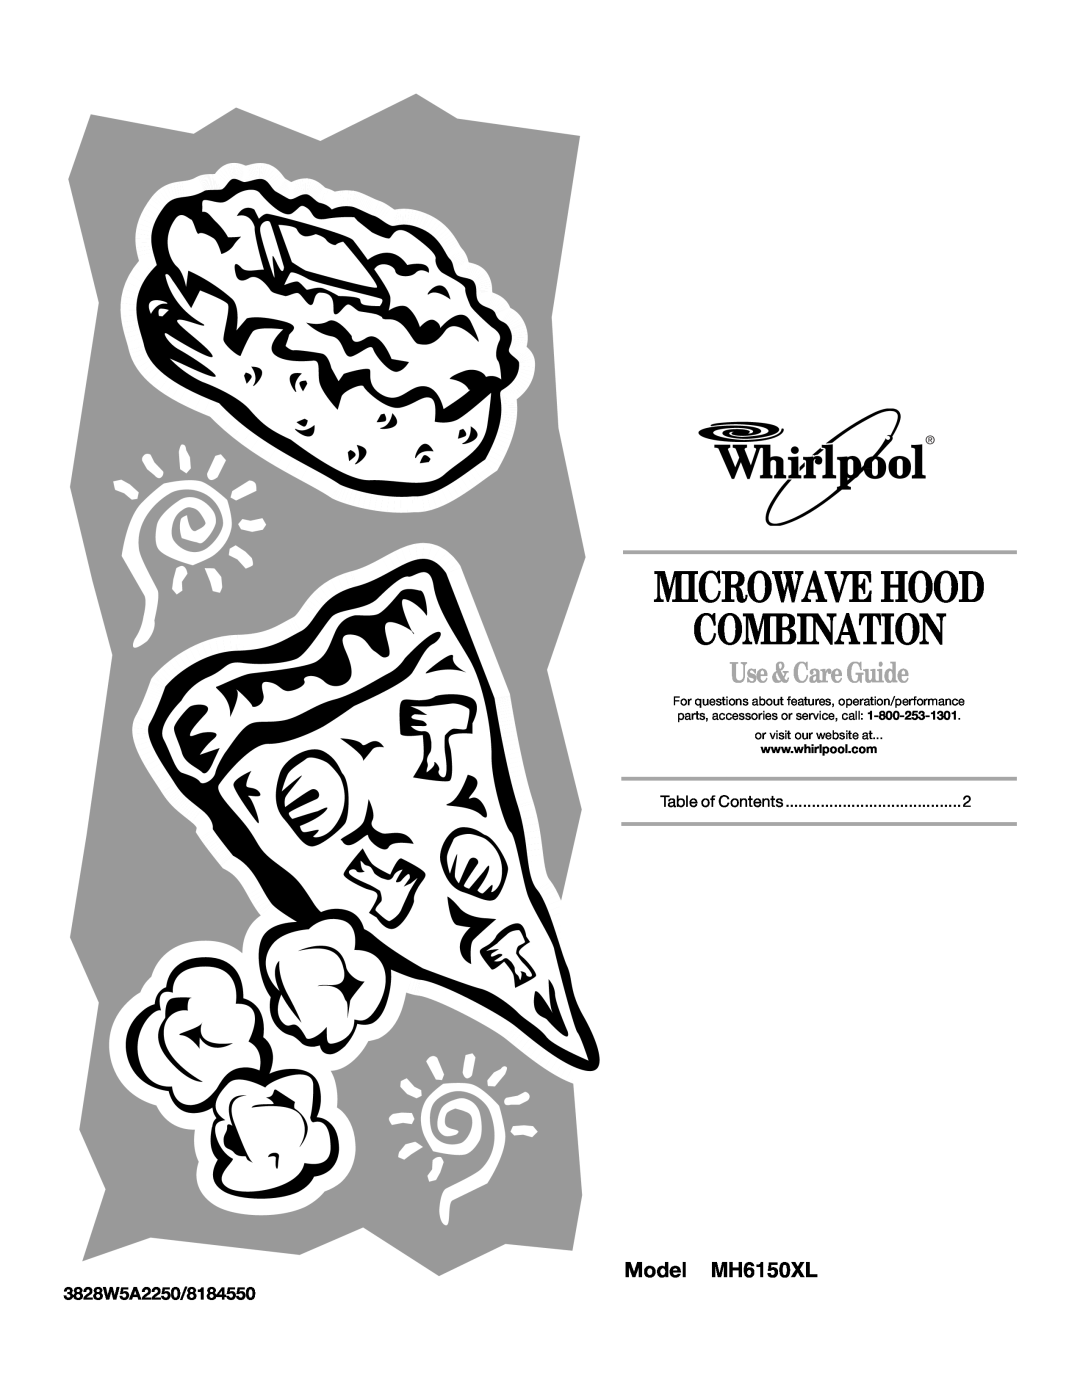 Whirlpool manual Microwave Hood Combination, Use & Care Guide, Model MH6150XL, or visit our website at 